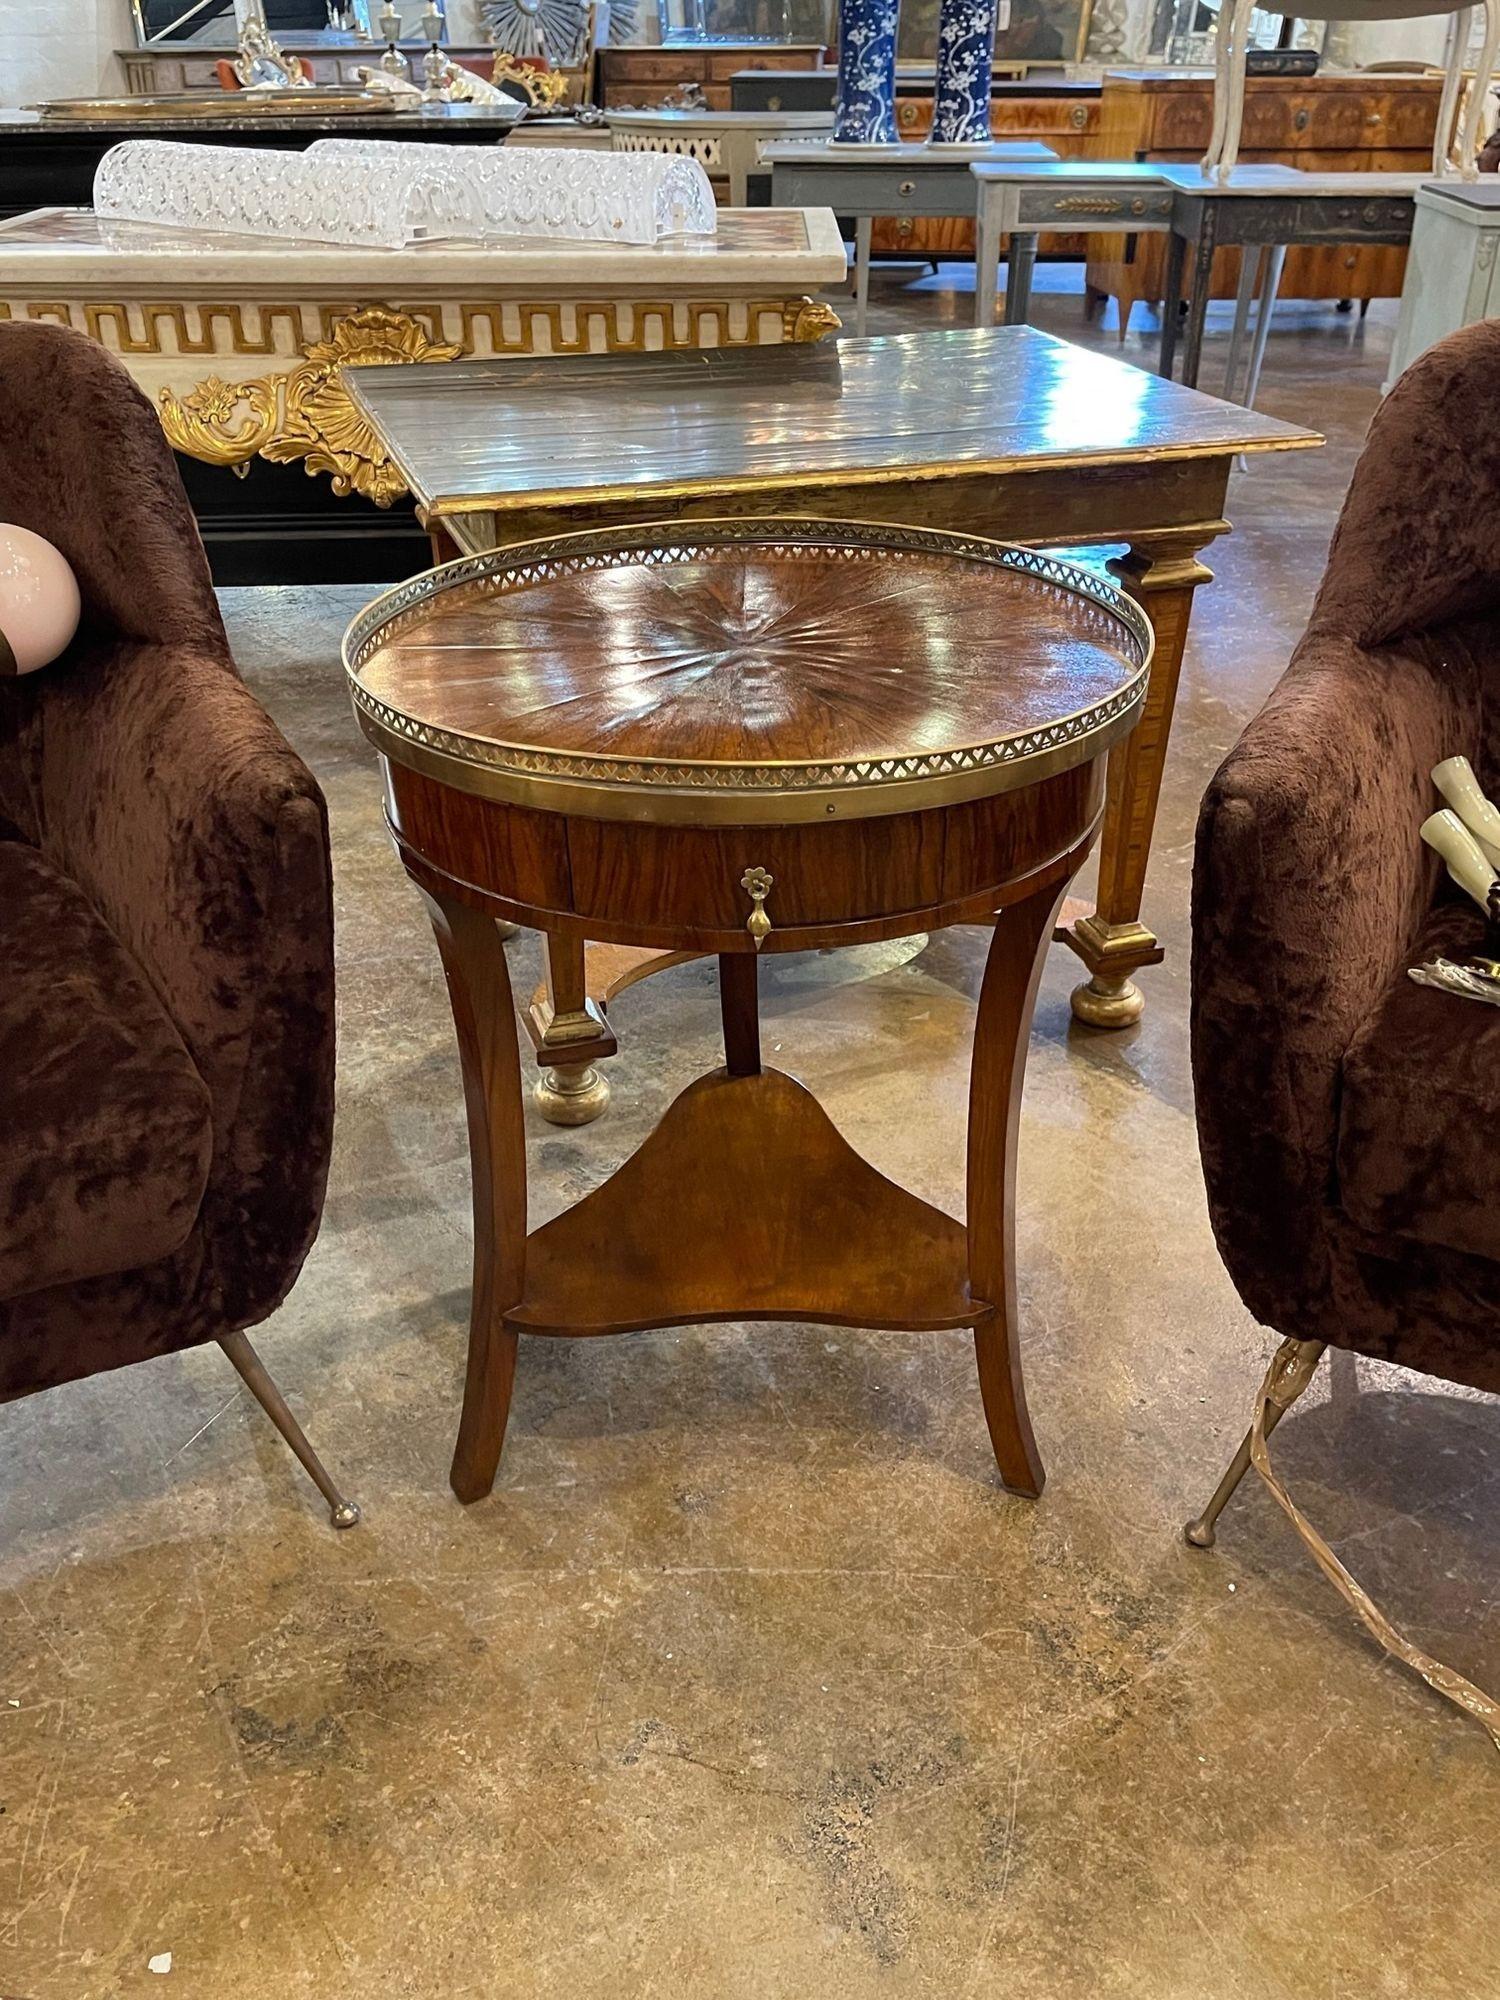 Handsome 19th century Italian Empire style walnut side table with brass gallery. A quality piece with a beautiful finish. Perfect for the traditional home!